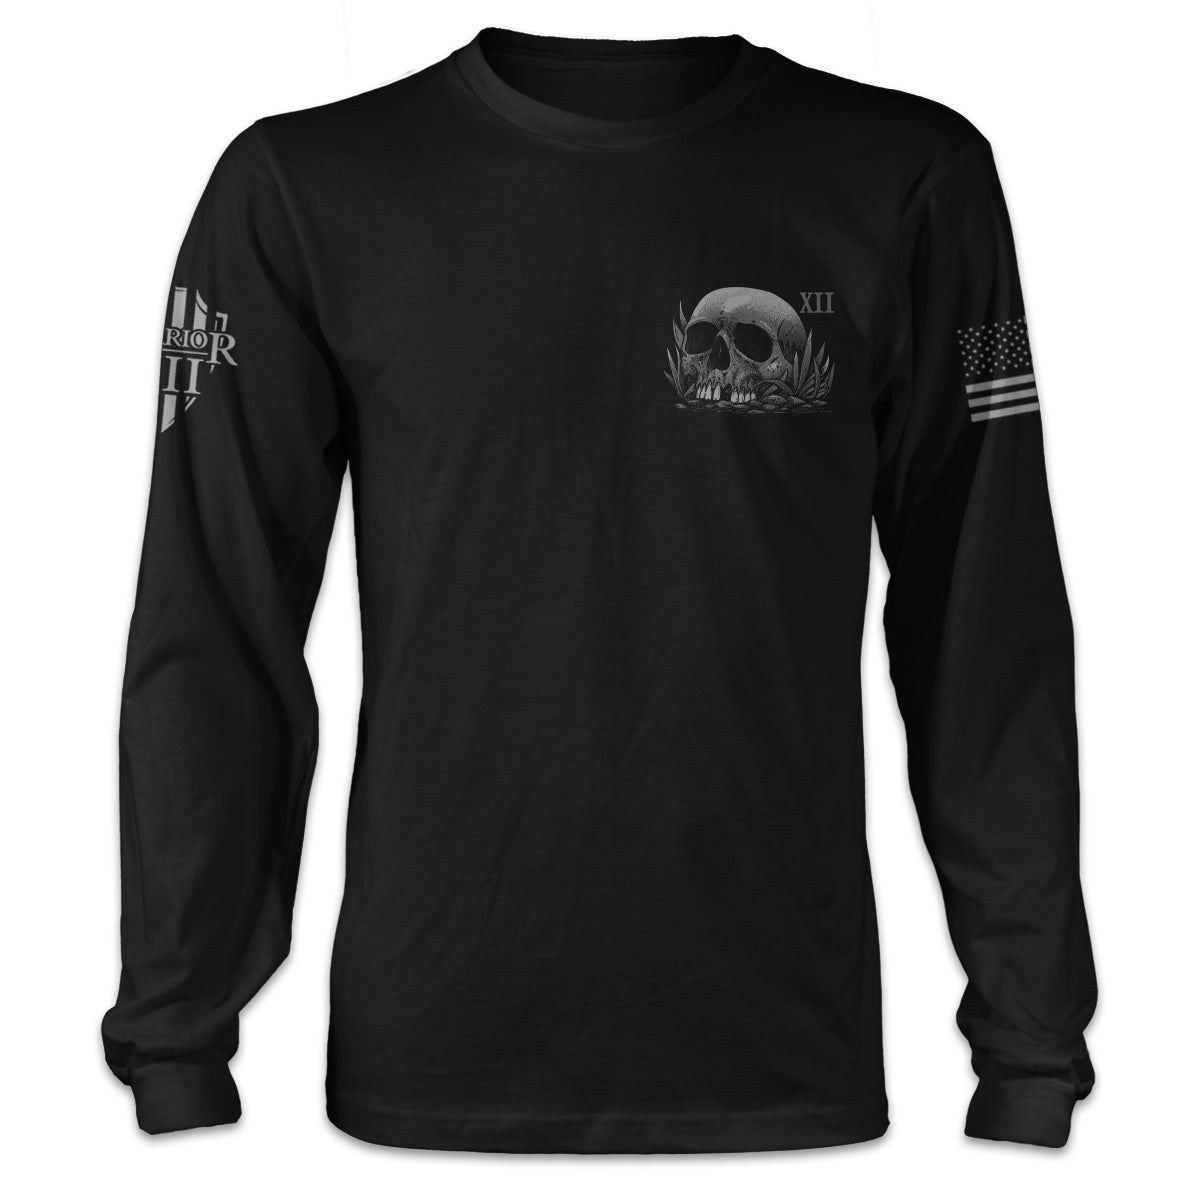 A black long sleeve shirt with a skull printed on the front.